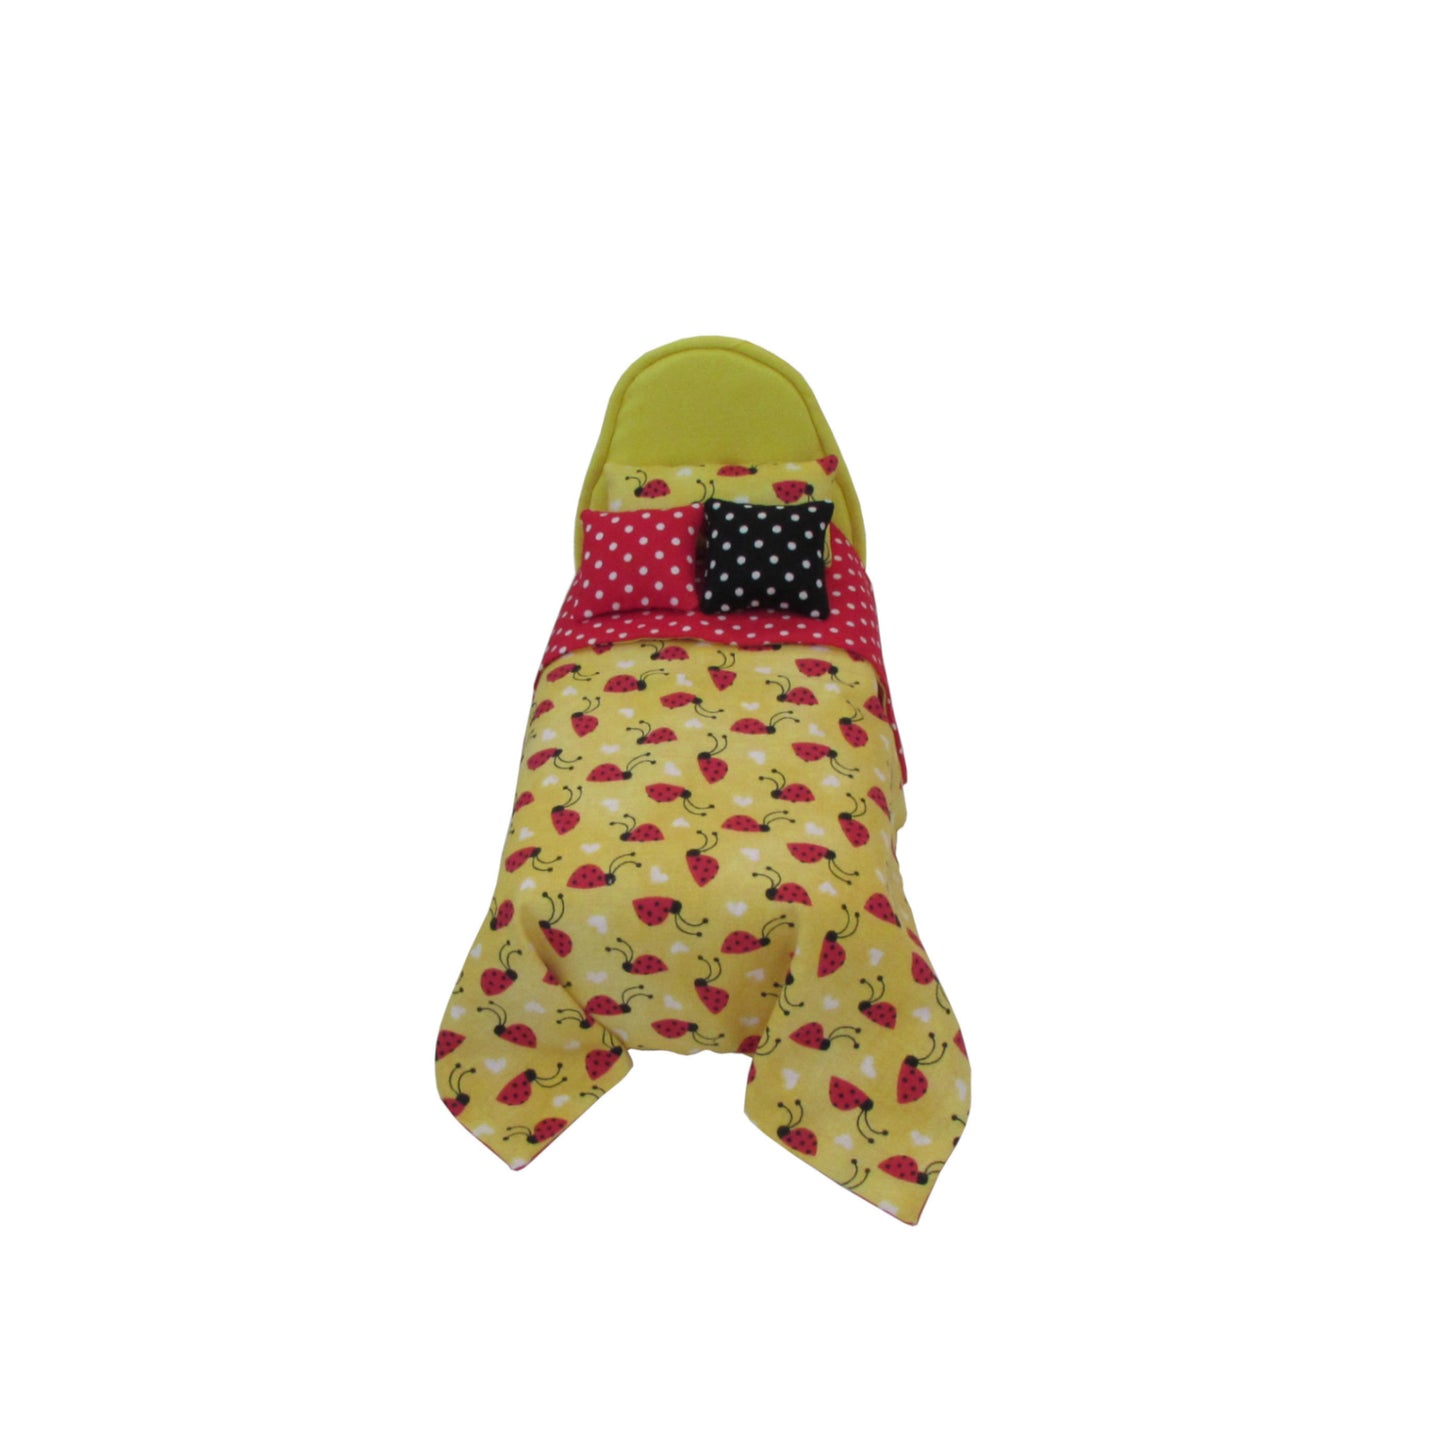 Bright Yellow Doll Bed and Reversible Ladybug Doll Bedding for 6.5-inch dolls Second view